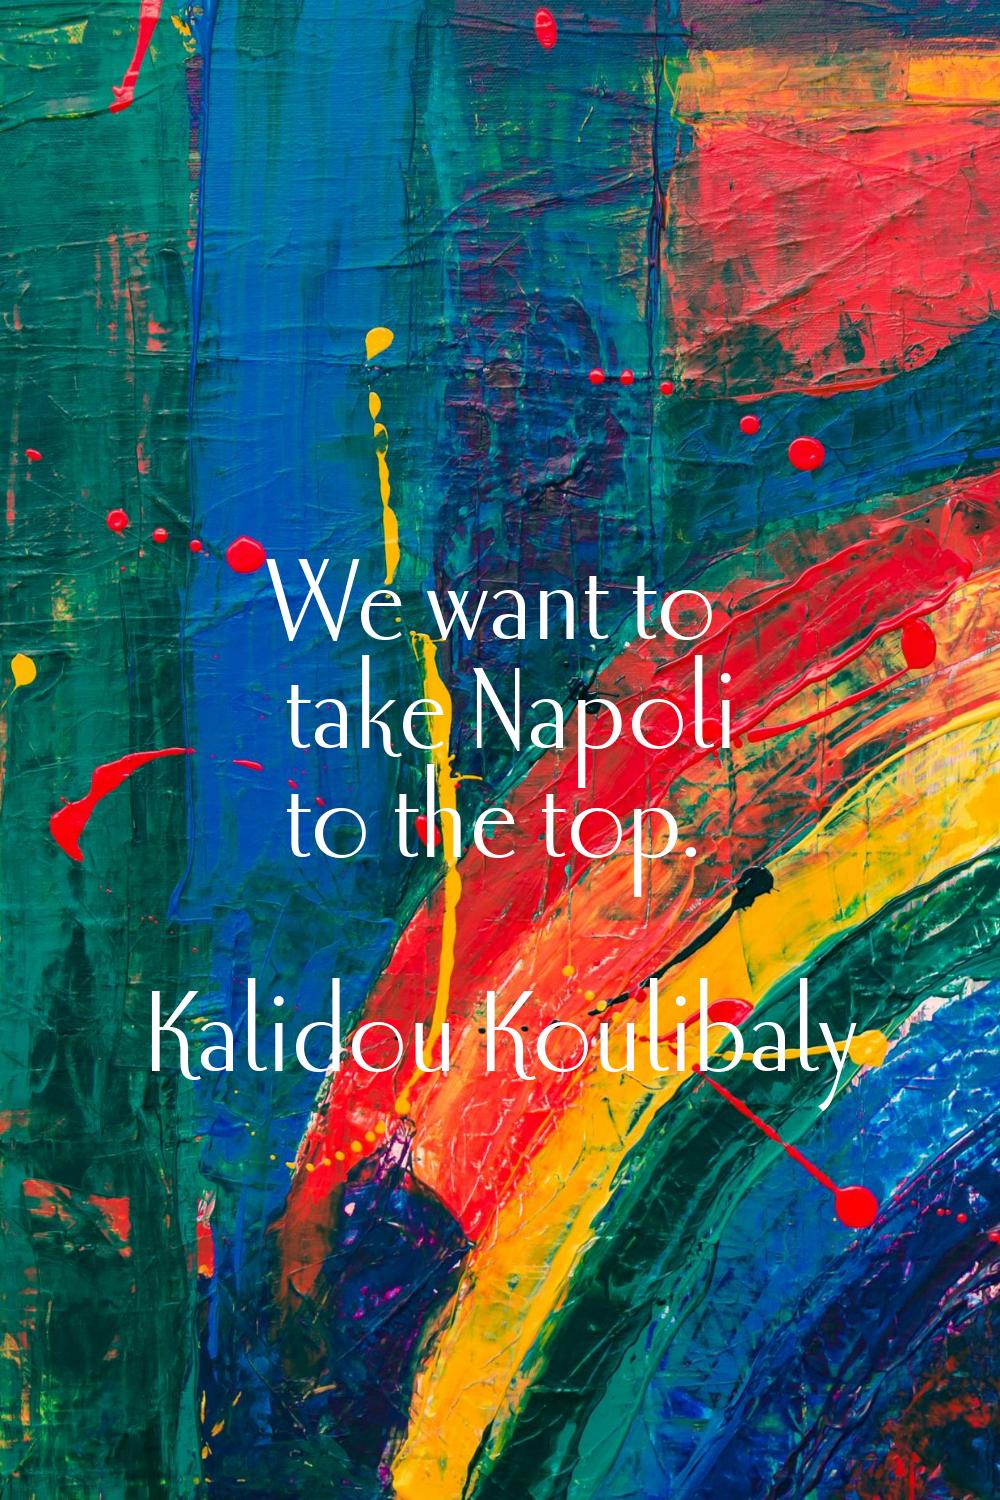 We want to take Napoli to the top.